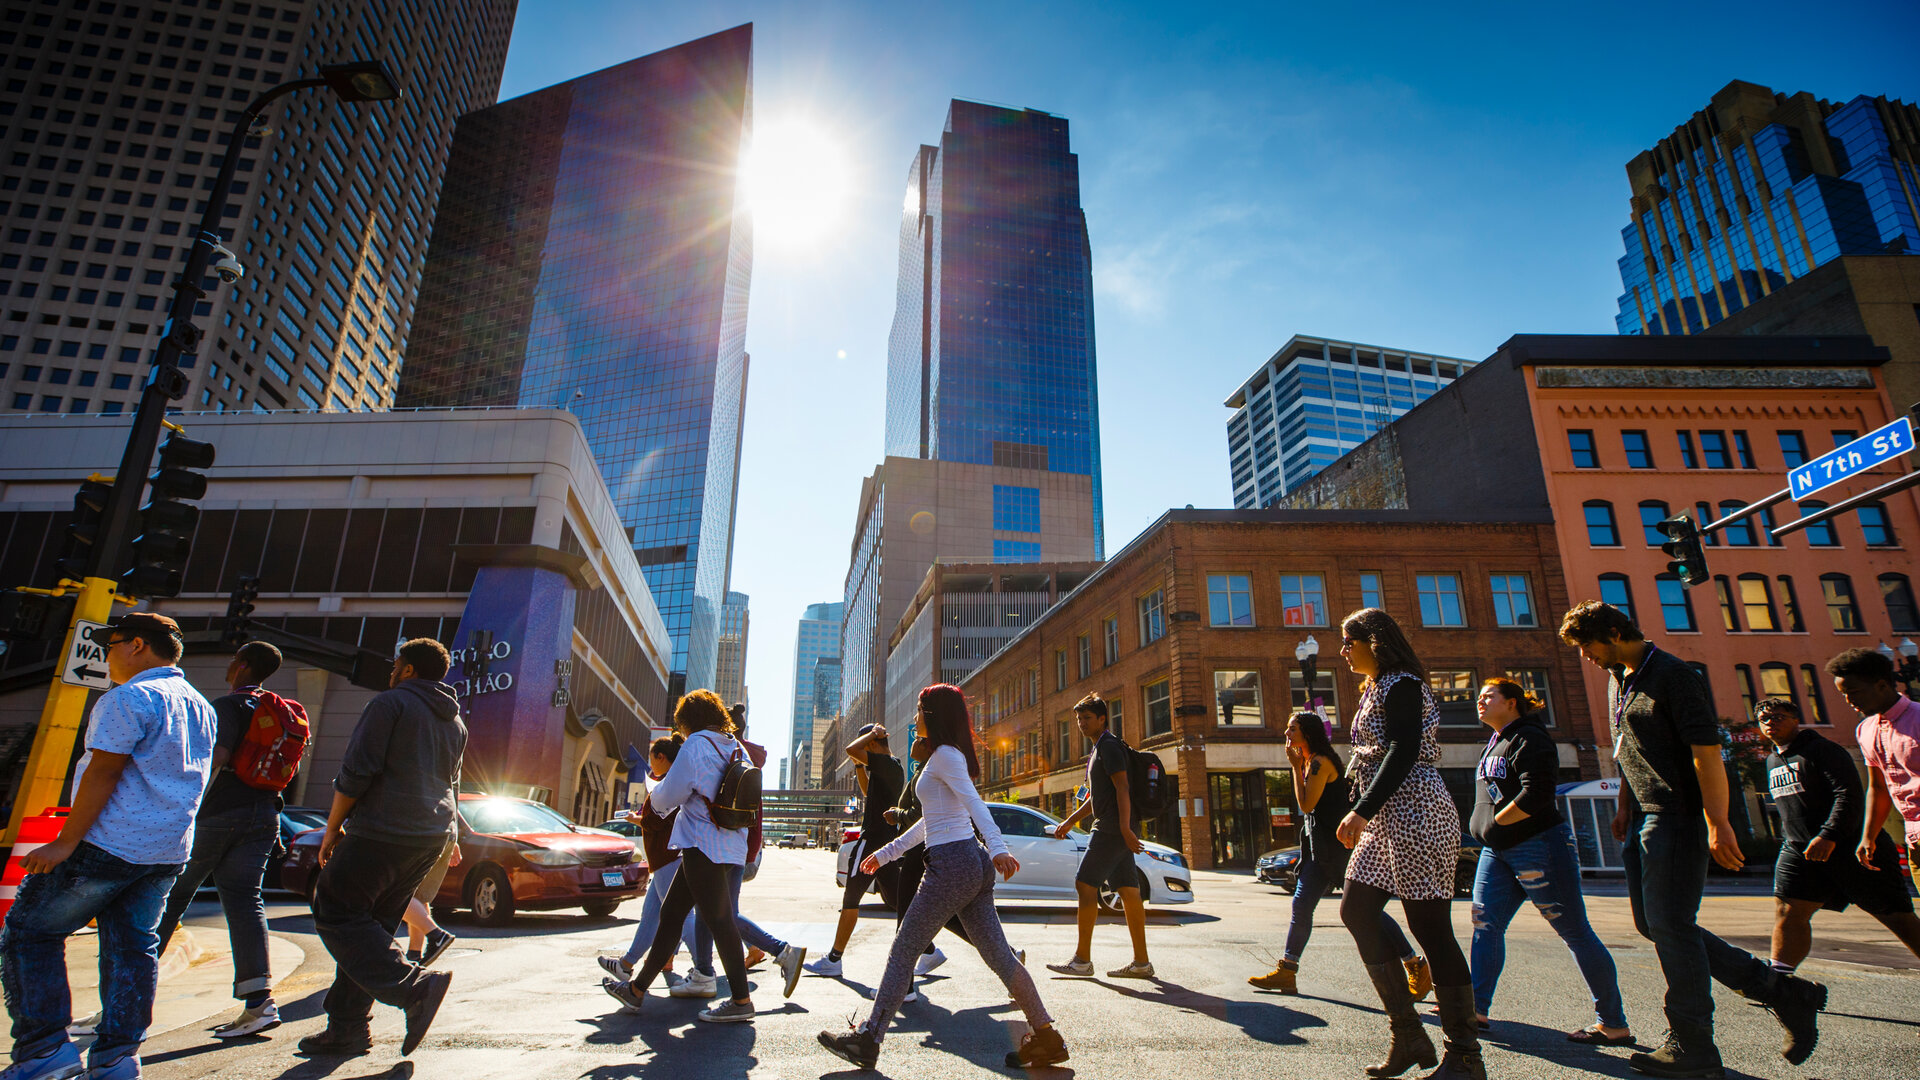 Students crossing the street in downtown Minneapolis